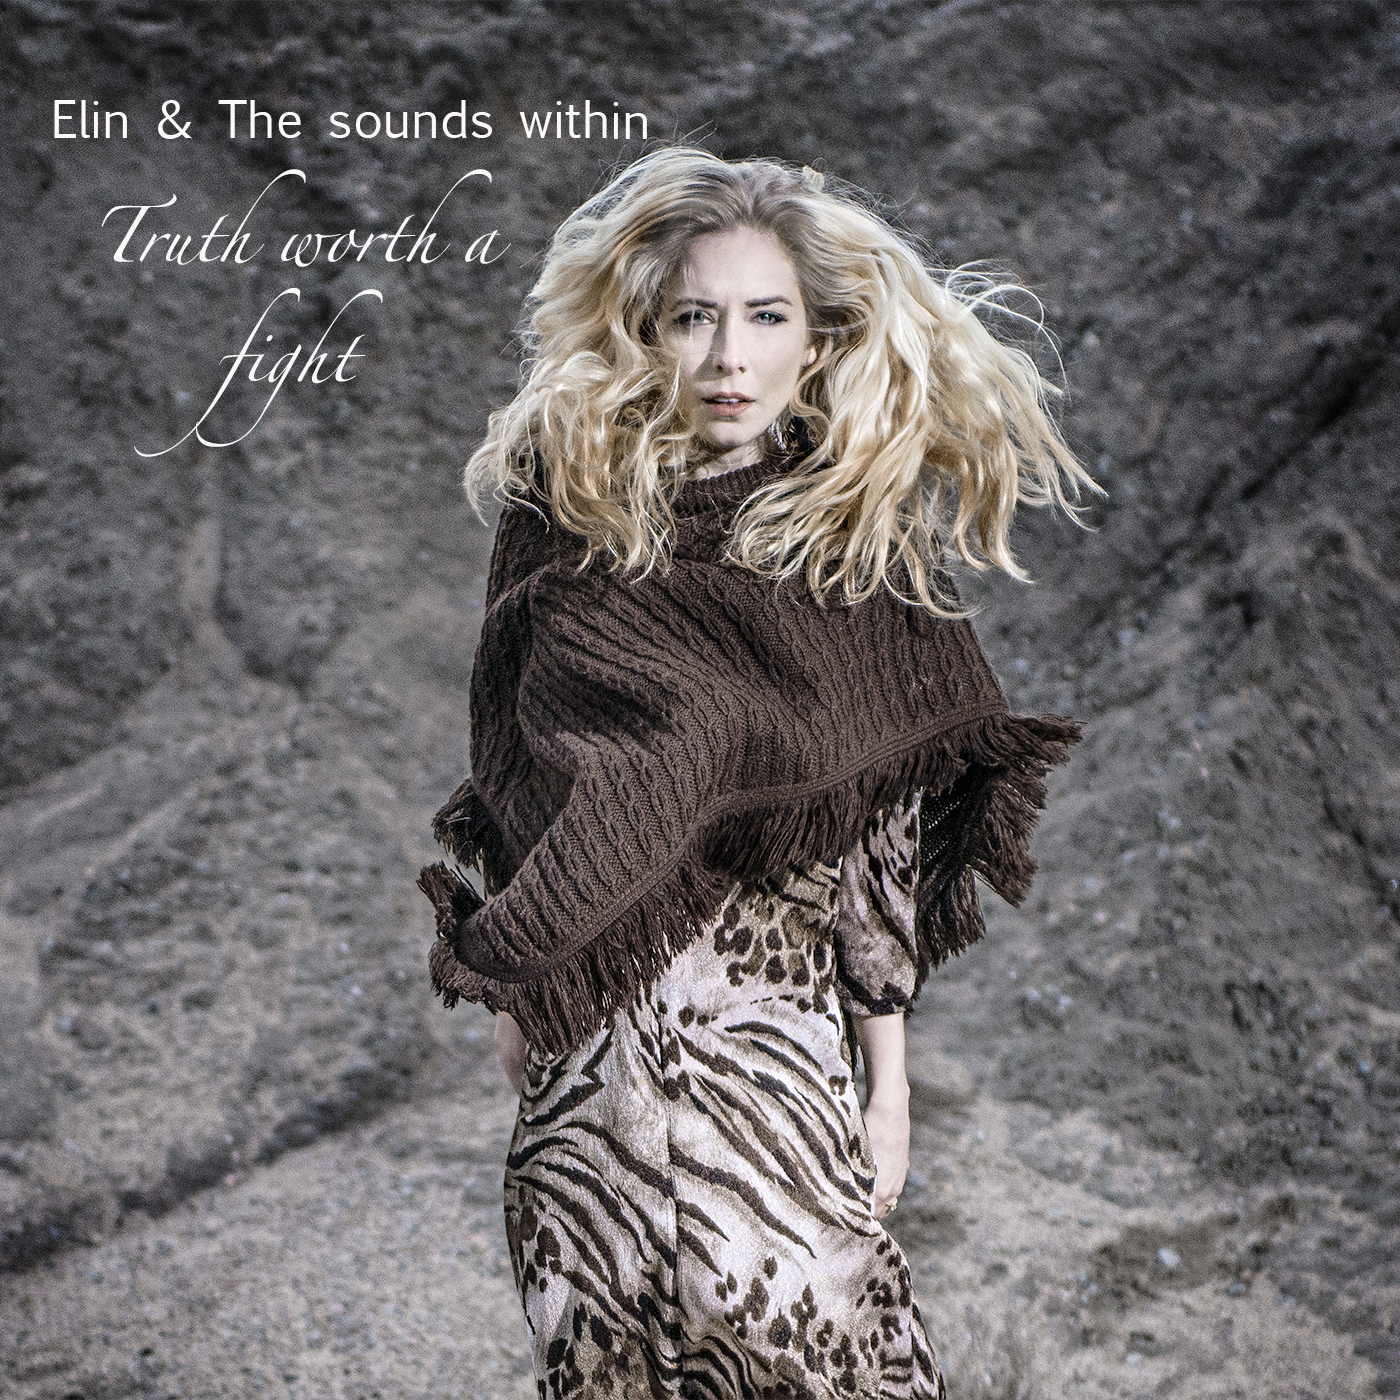 Elin & The Sonds Within